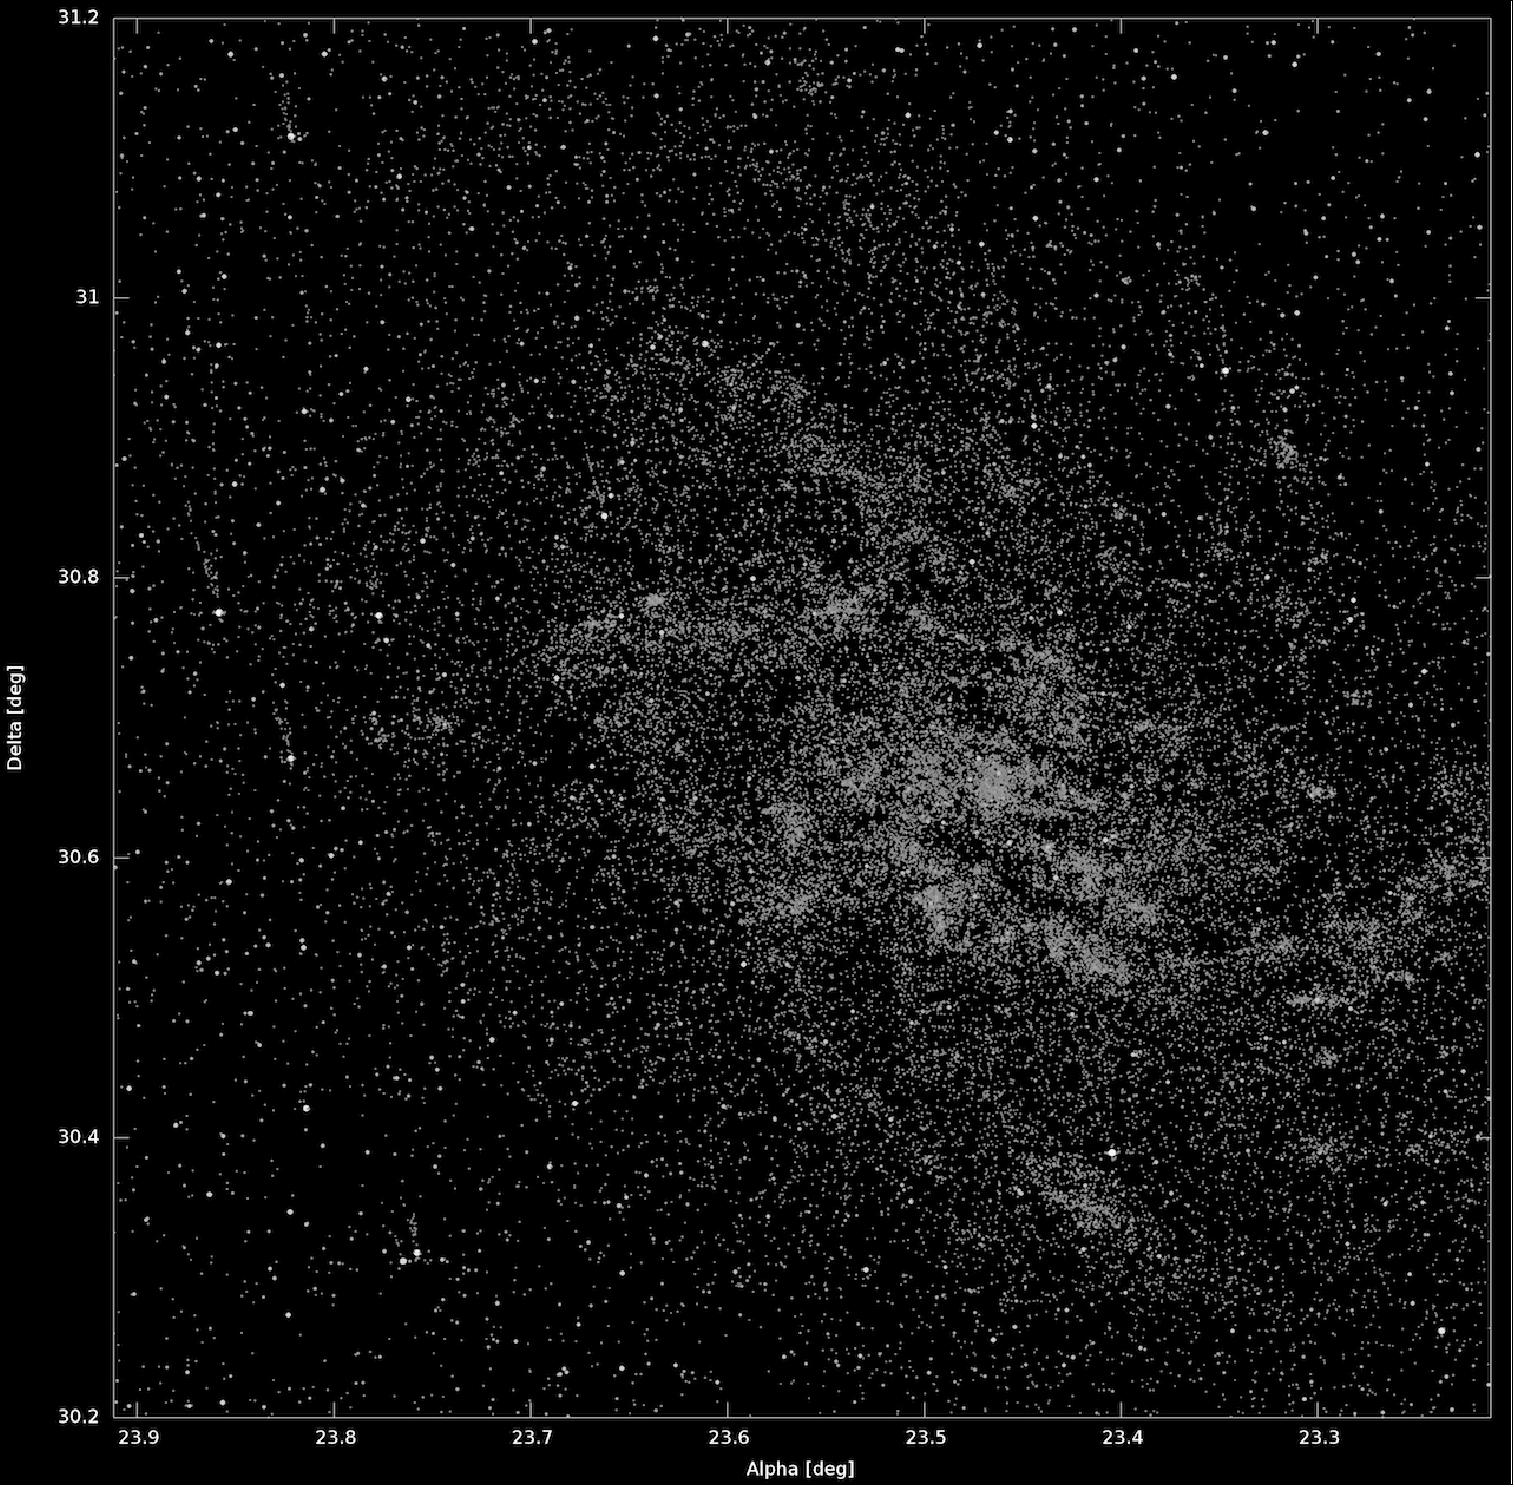 Figure 70: A view of M33, also known as the Triangulum galaxy, obtained by ESA's Gaia satellite. A new image of the patch of sky where M33 is found, based on 26 scans performed between 7 and 9 December 2016, shows all points where Gaia detected one or more sources (image credit: ESA/Gaia/DPAC)